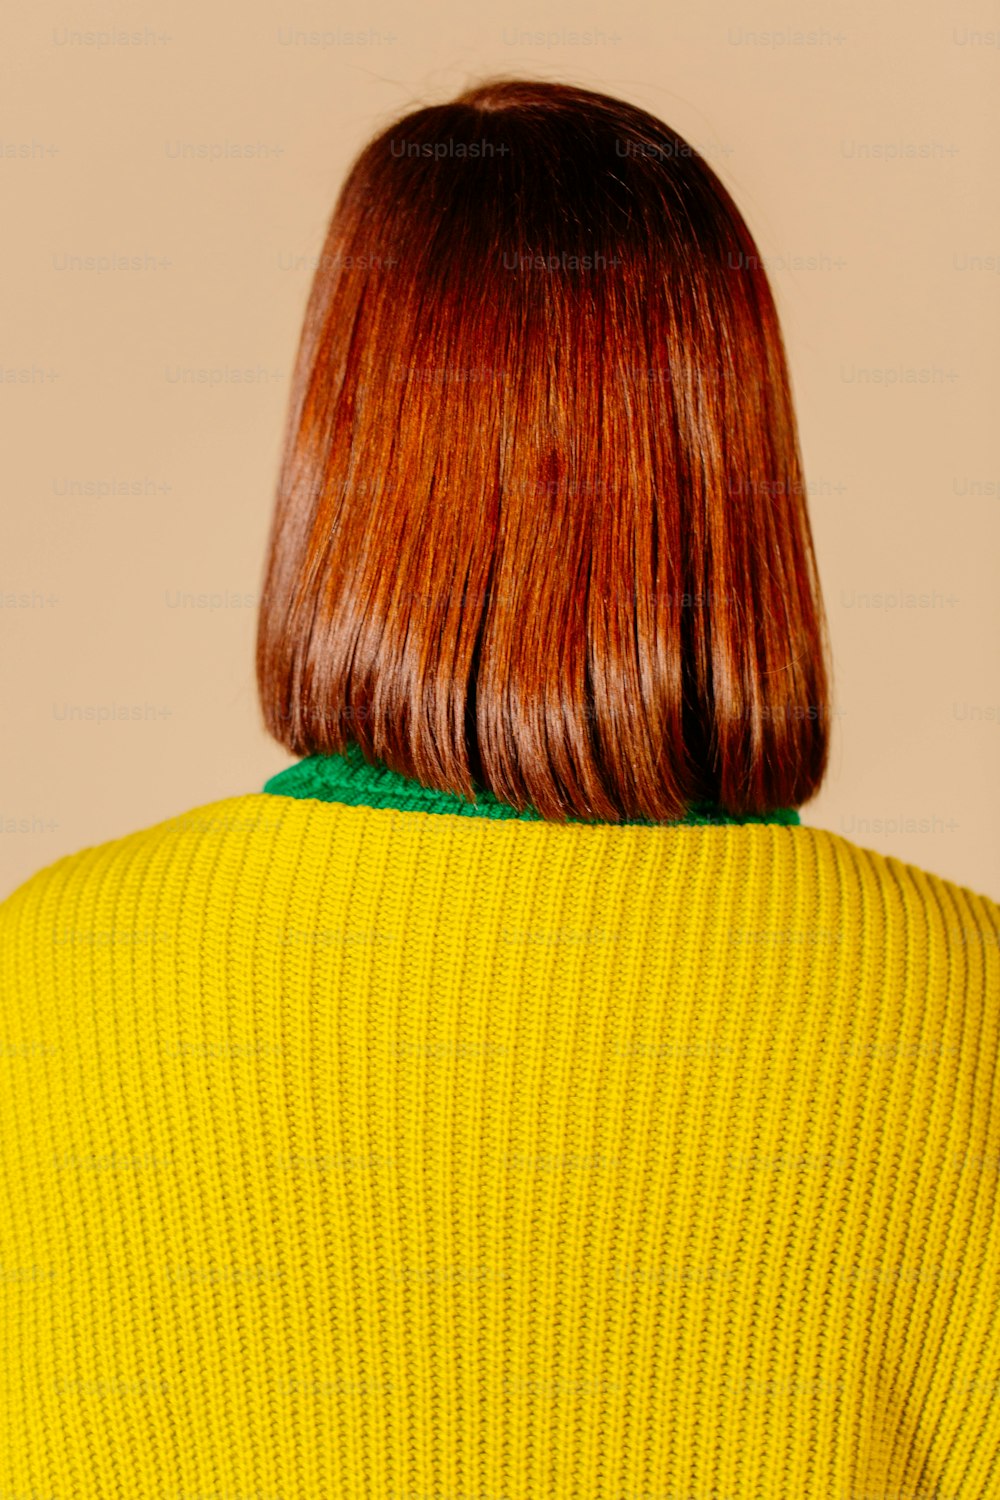 a woman with red hair wearing a yellow sweater